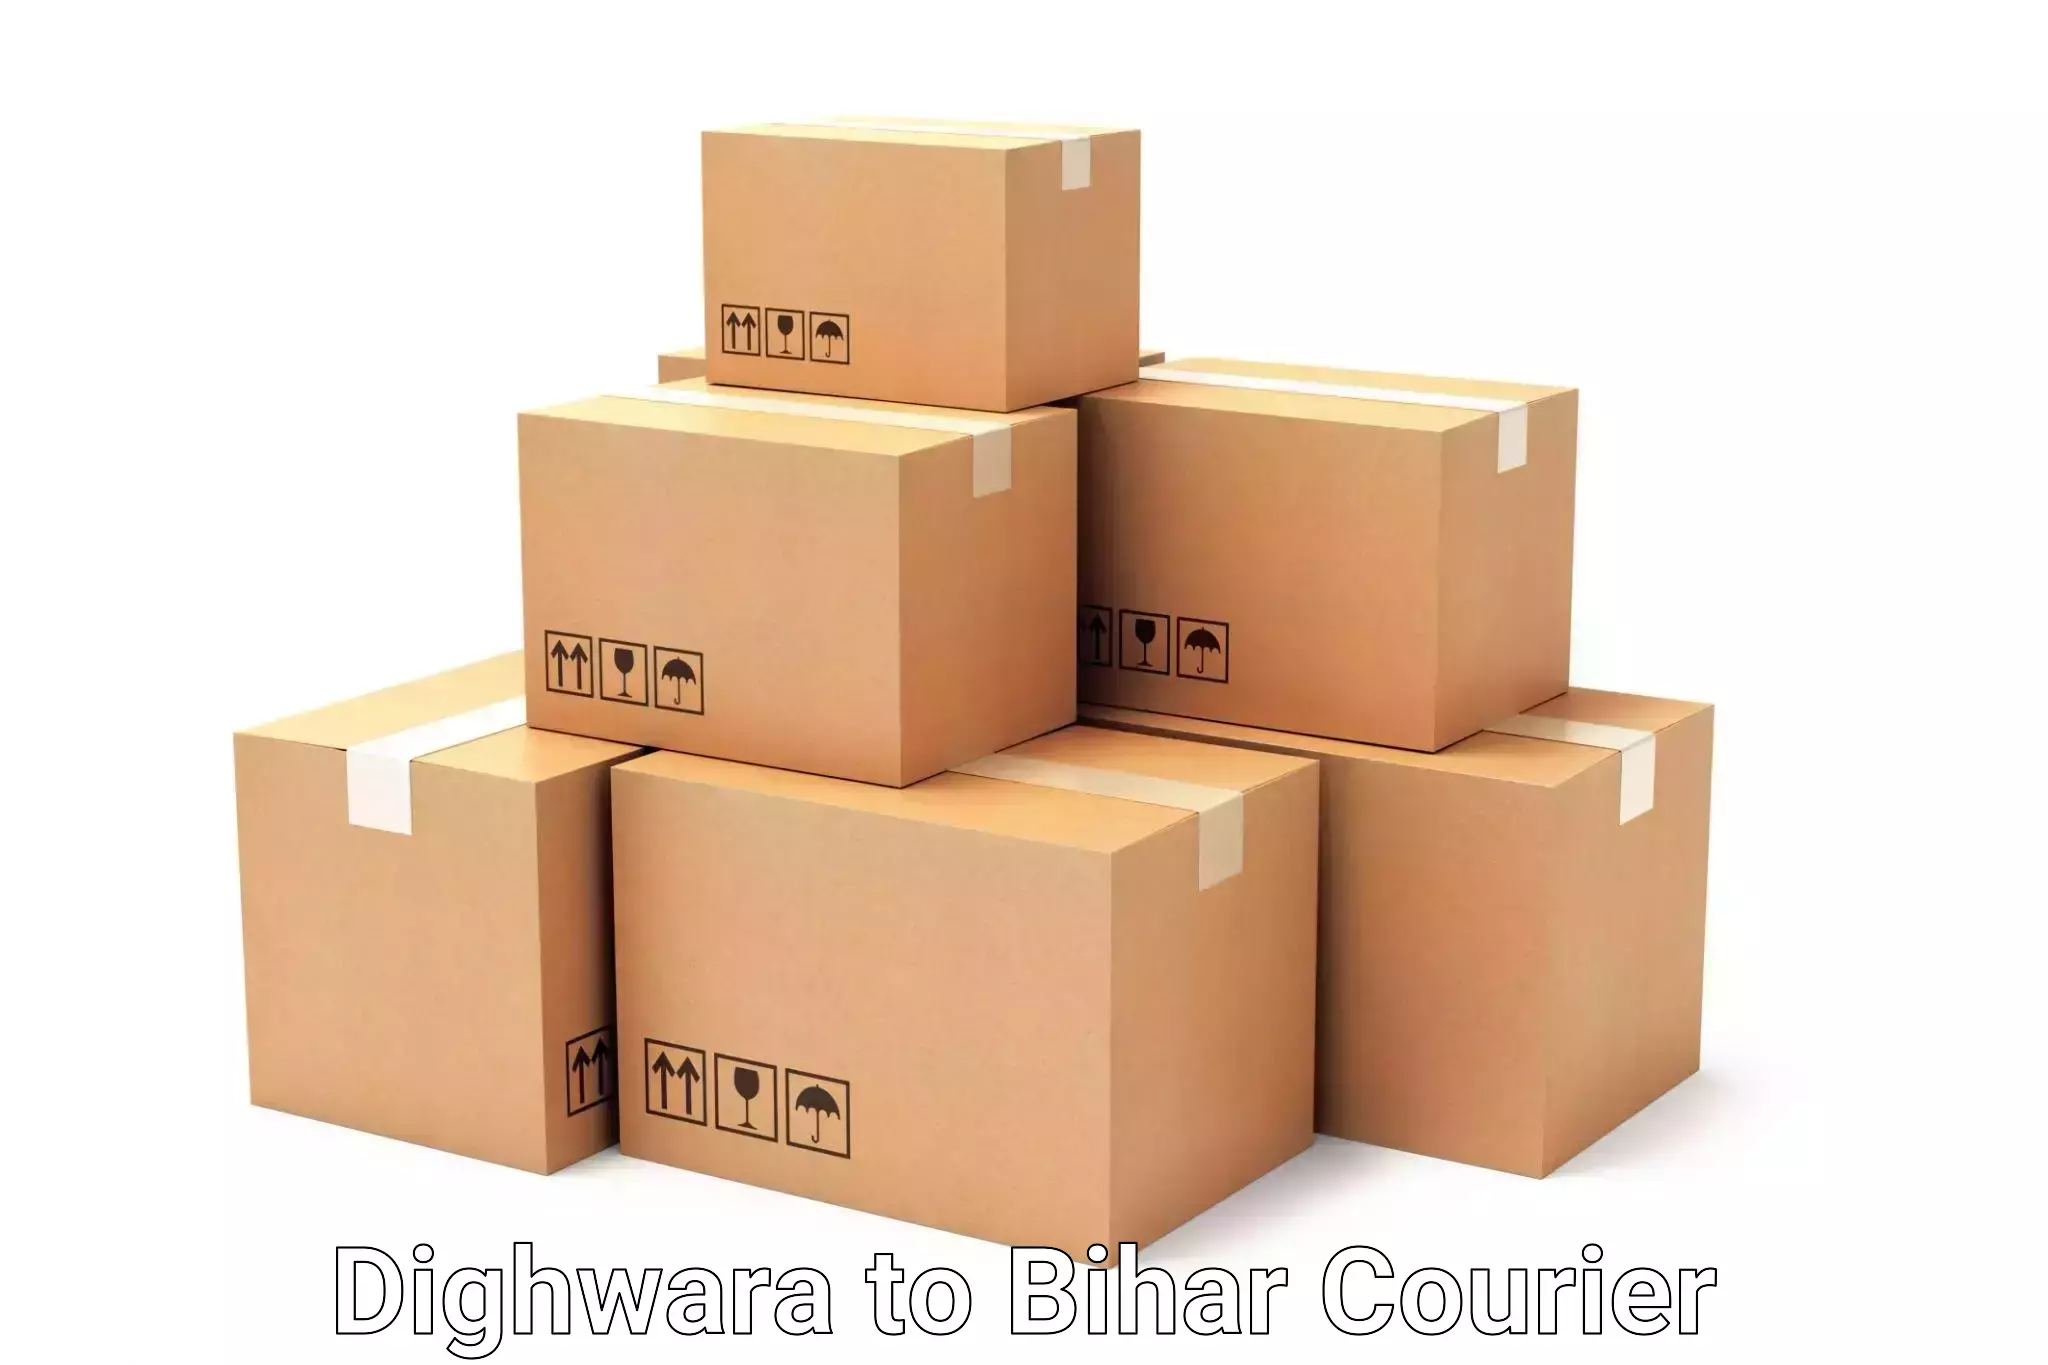 Luggage shipment specialists Dighwara to Mohania